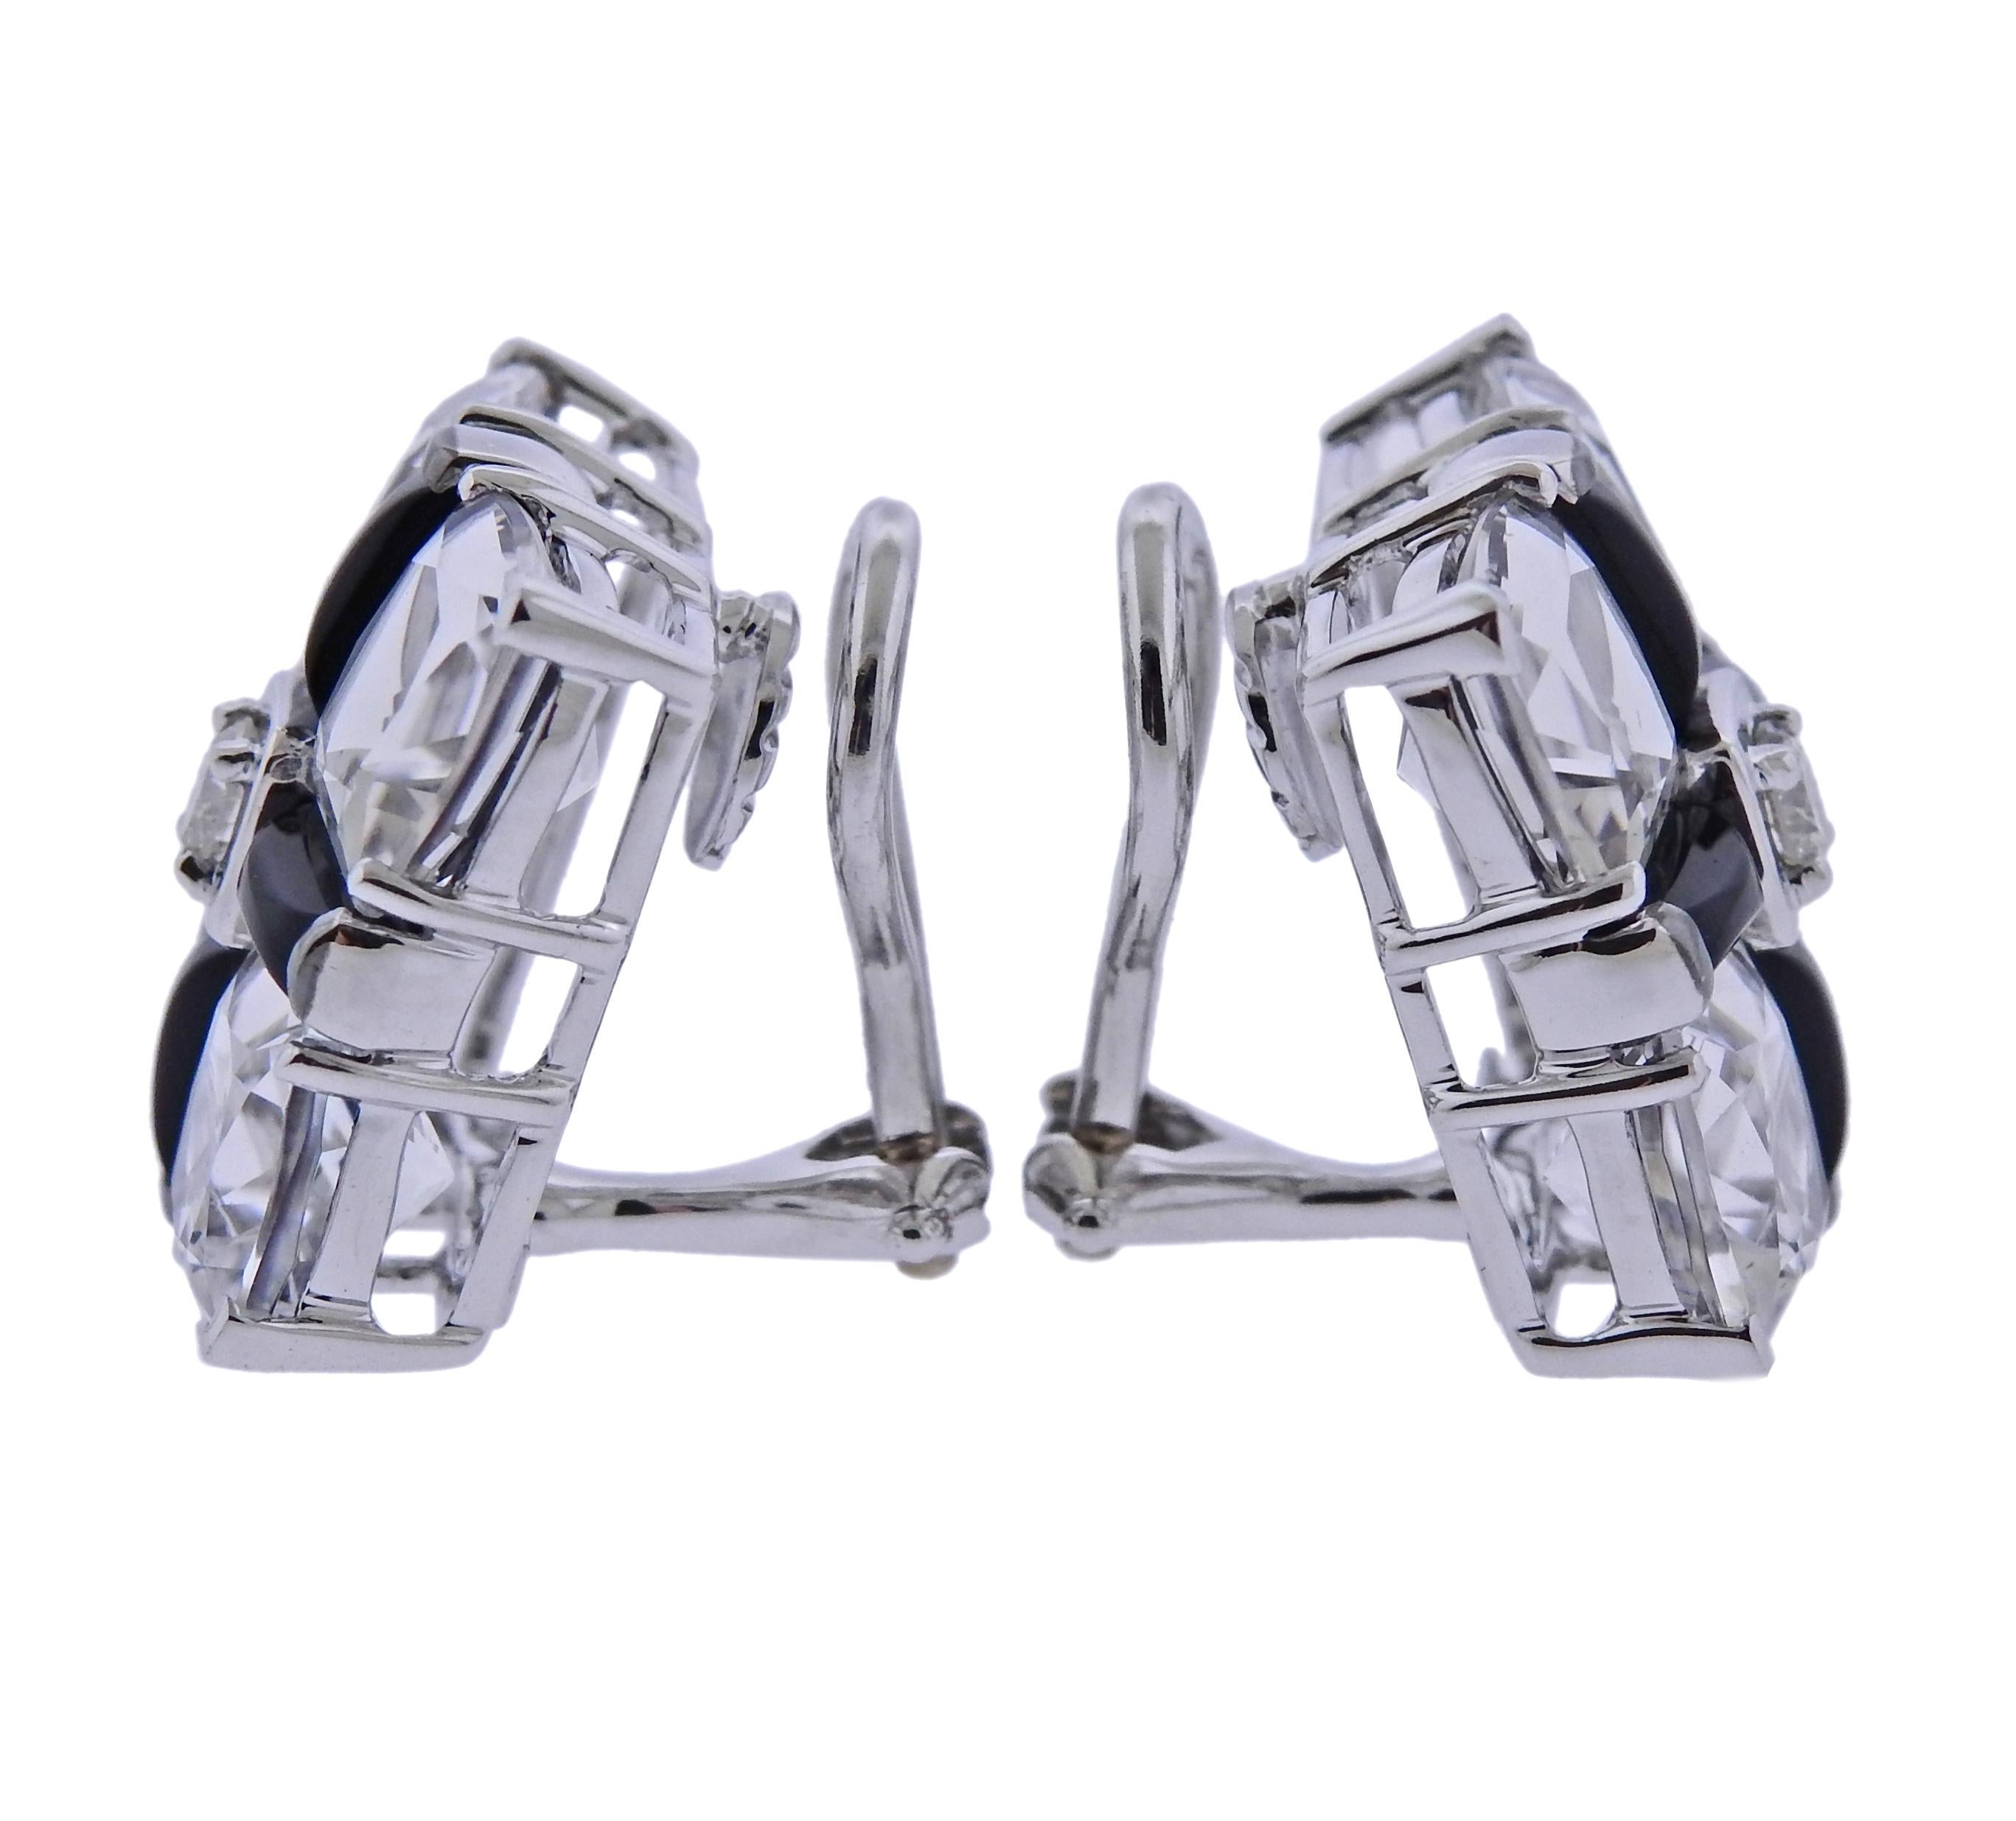 Pair of new 18k white gold Quad earrings by Seaman Schepps, set with approx. 0.24ctw in G/VS diamonds, crystal and onyx.  Earrings are 17mm x 17mm, weigh 12.4 grams. Marked: 243483, 750, Shell hallmark. 